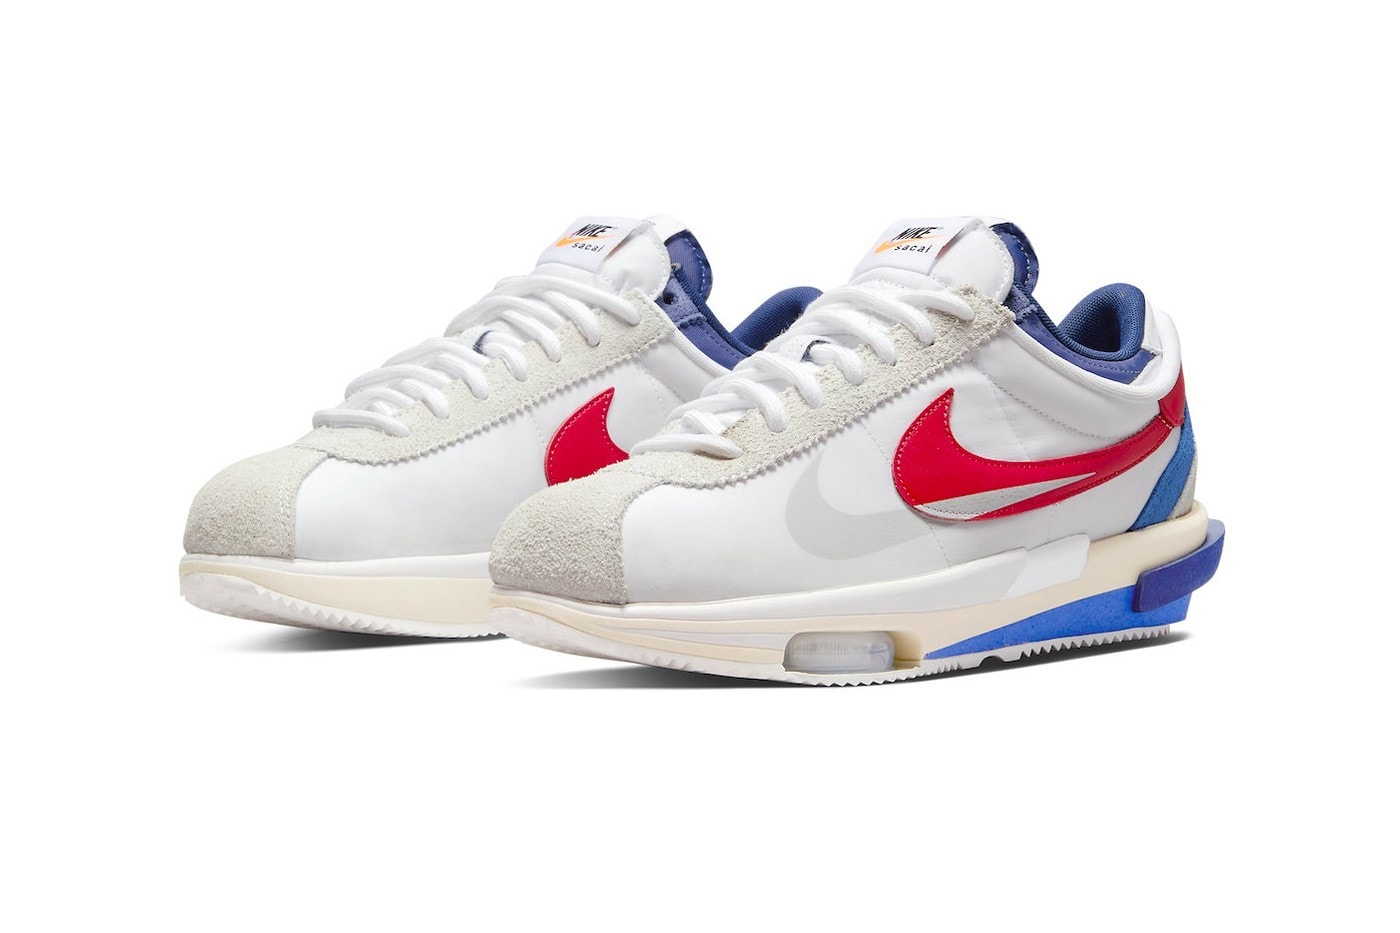 sacai nike cortez detailed look release info 2022 sneakers